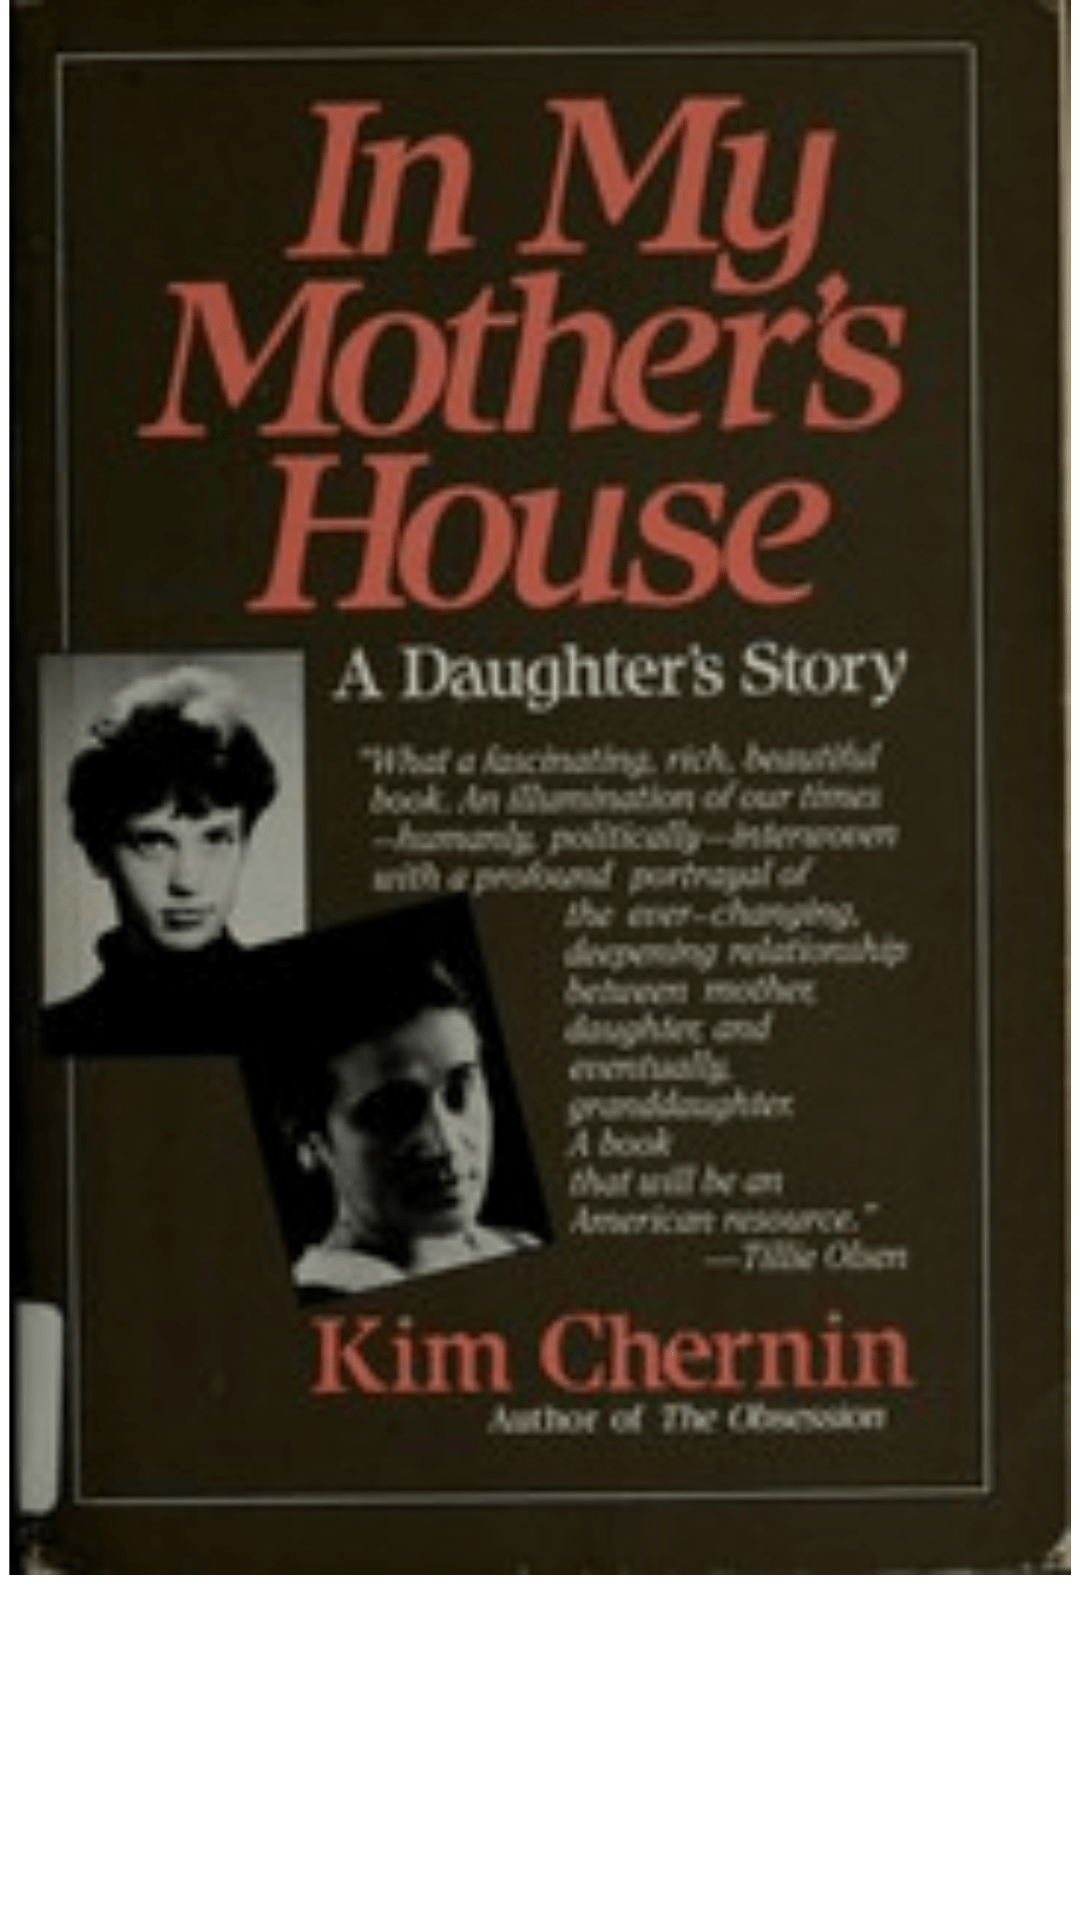 In My Mother's House by Kim Chernin